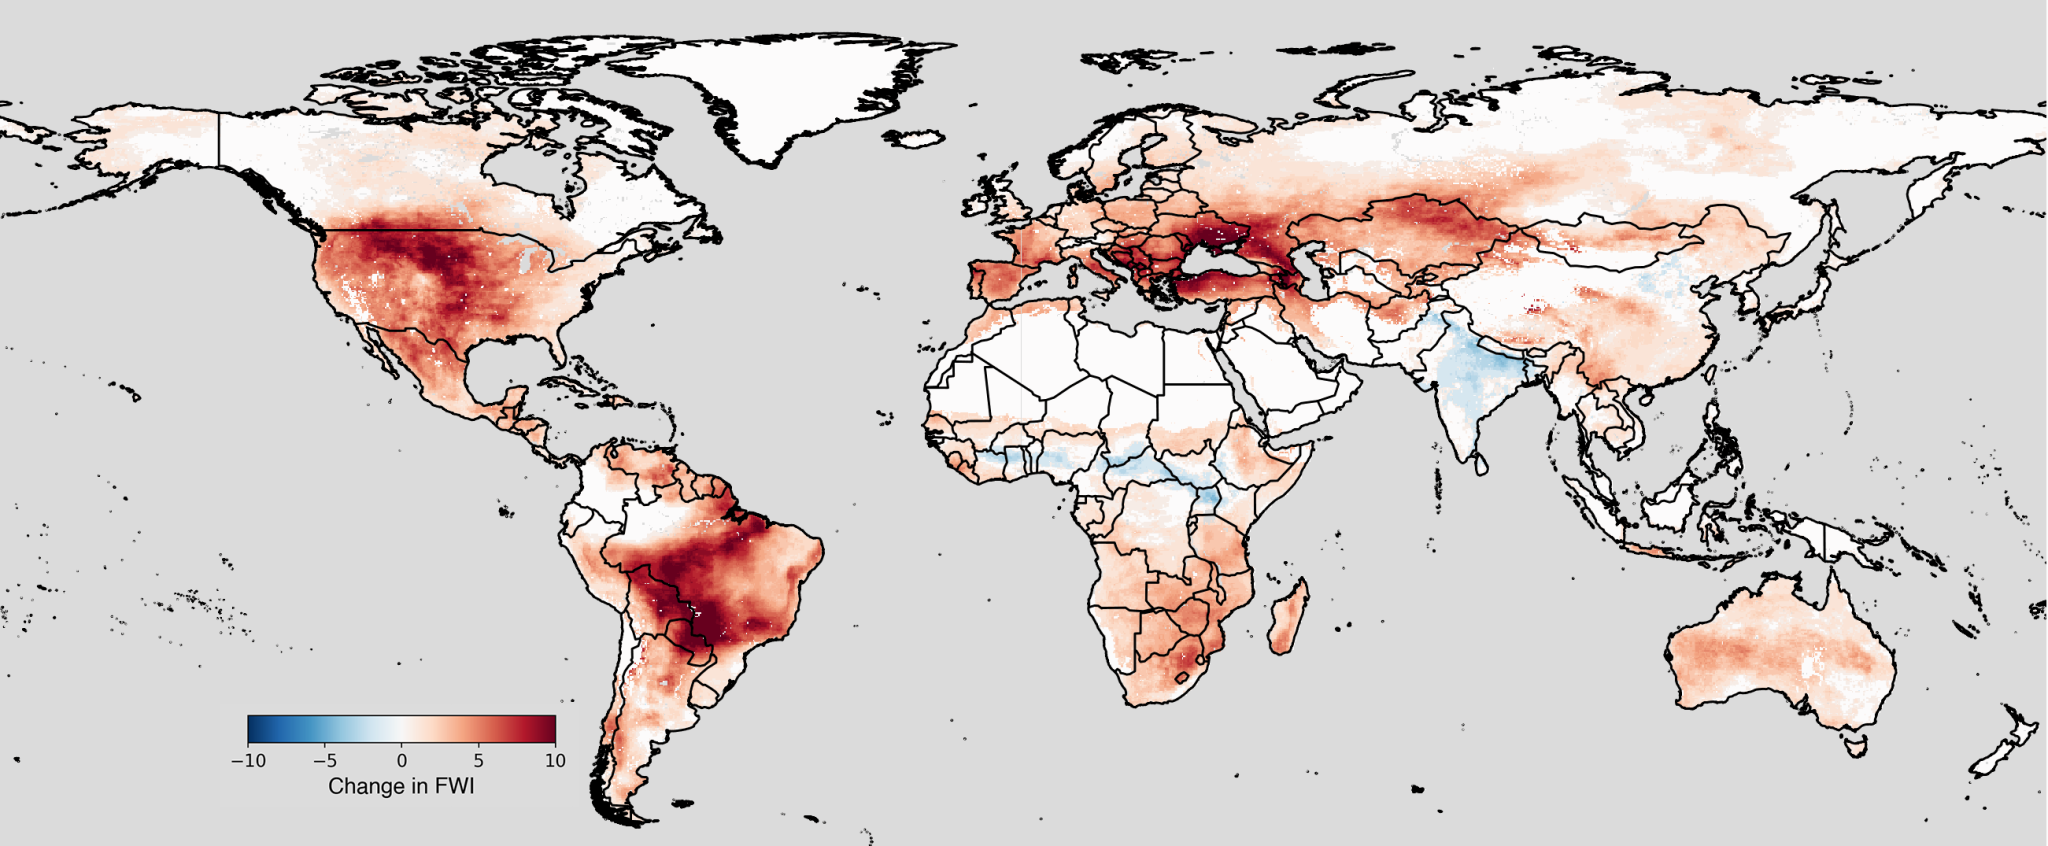 This map shows global change in a measure called “fire weather index